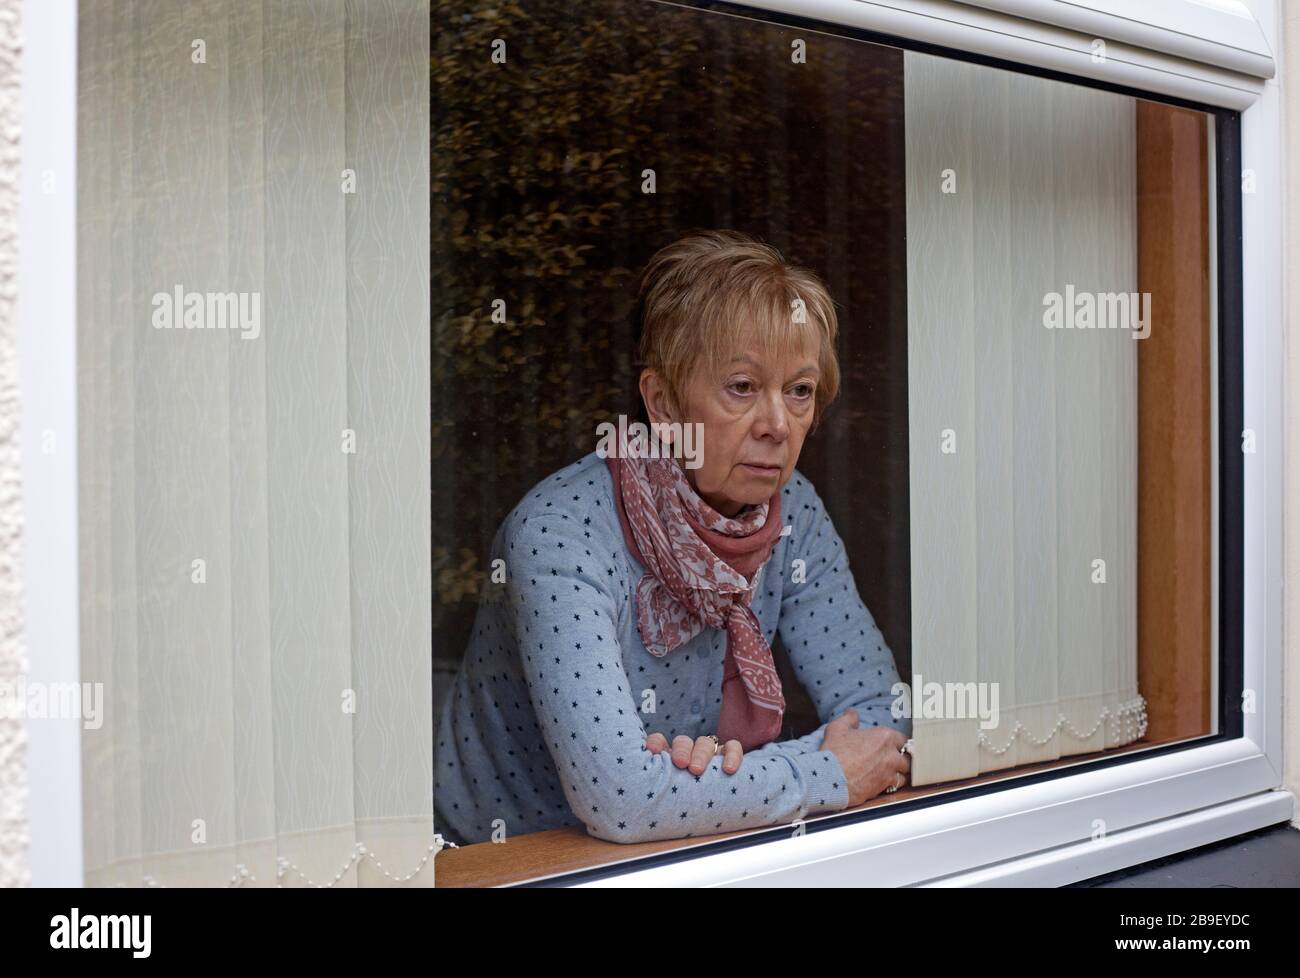 Edinburgh, Scotland, UK. 24th Mar 2020. Stringent new measures to fight coronavirus sees a ban on people gathering in public and restrictions on people leaving their homes.Scottish First Minister urges public to stay at home and says new rules amount to 'lockdown'. Pictured: elderly female  looking depressed for what the future holds as  she looks out of house window, the quarantine could last for a minimum of three weeks.  499 people in Scotland have tested positive for coronavirus in Scotland - with 14 deaths. (posed by model) Stock Photo